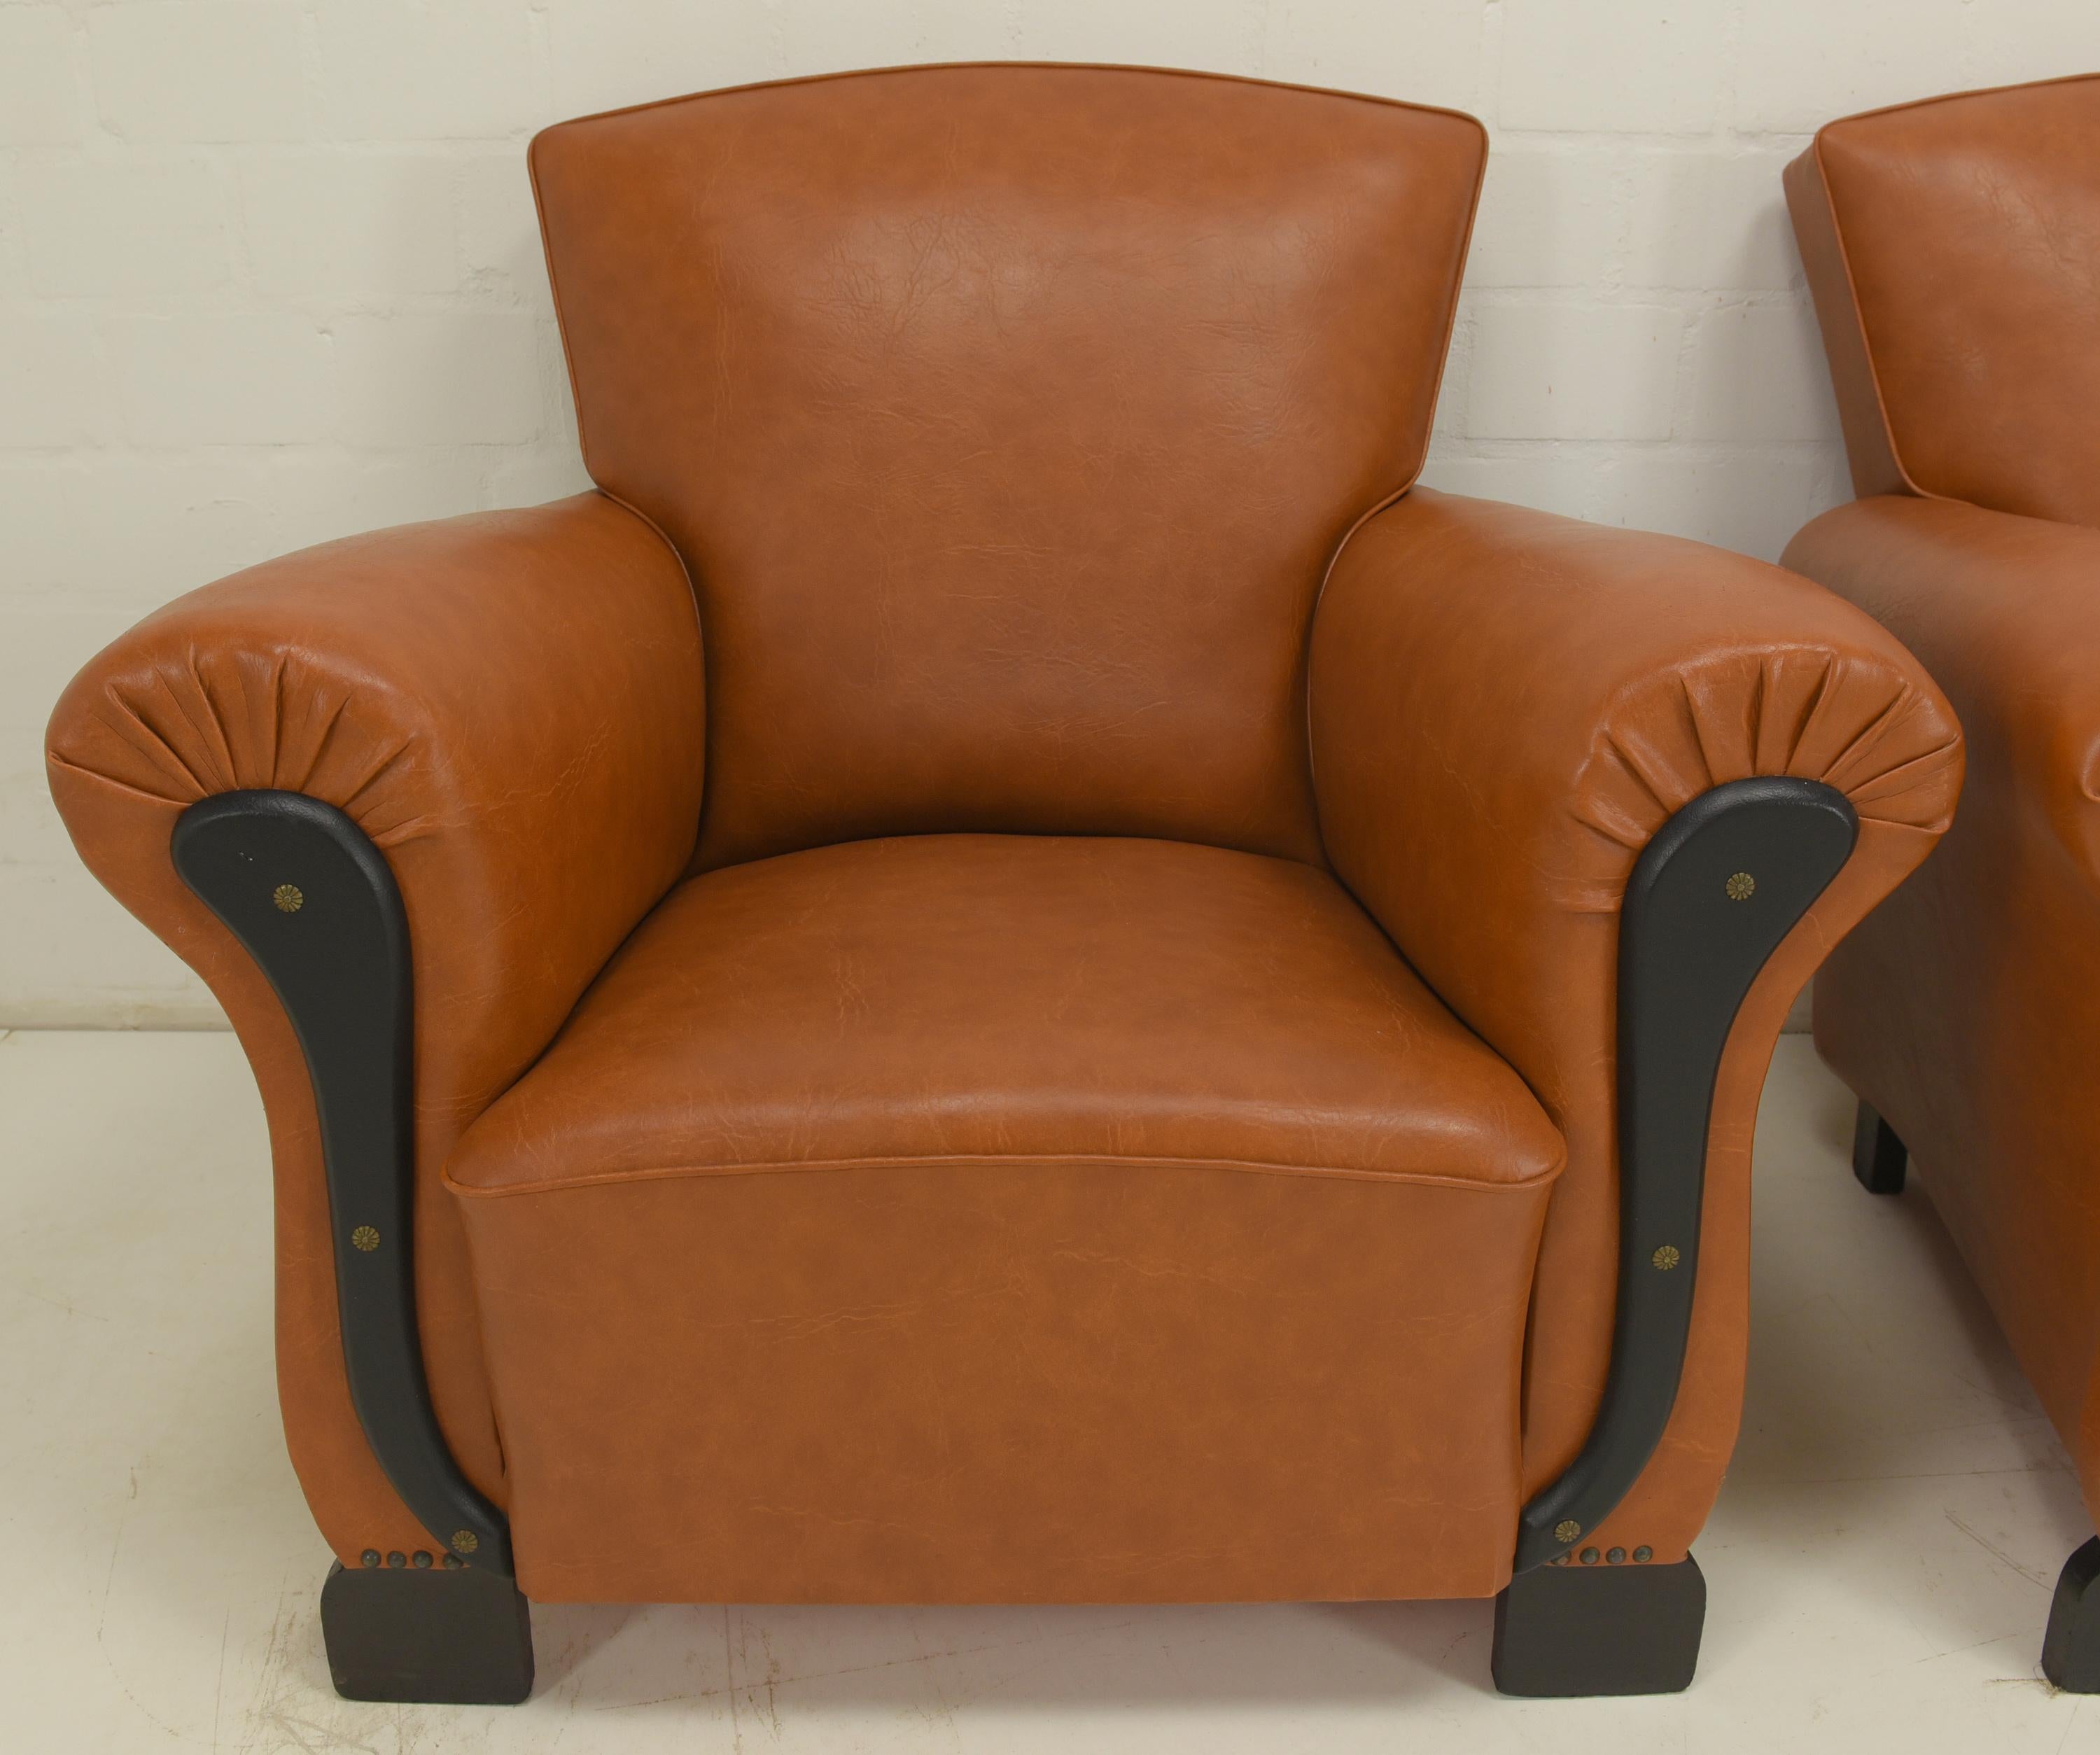 Pair of club armchairs Art Déco around 1940 Lounge chairs imitation leather armchairs two 2

Features:
Minor damage on the armrests (small holes)
Stylish art deco design
Very rare as a pair in such good condition

Additional